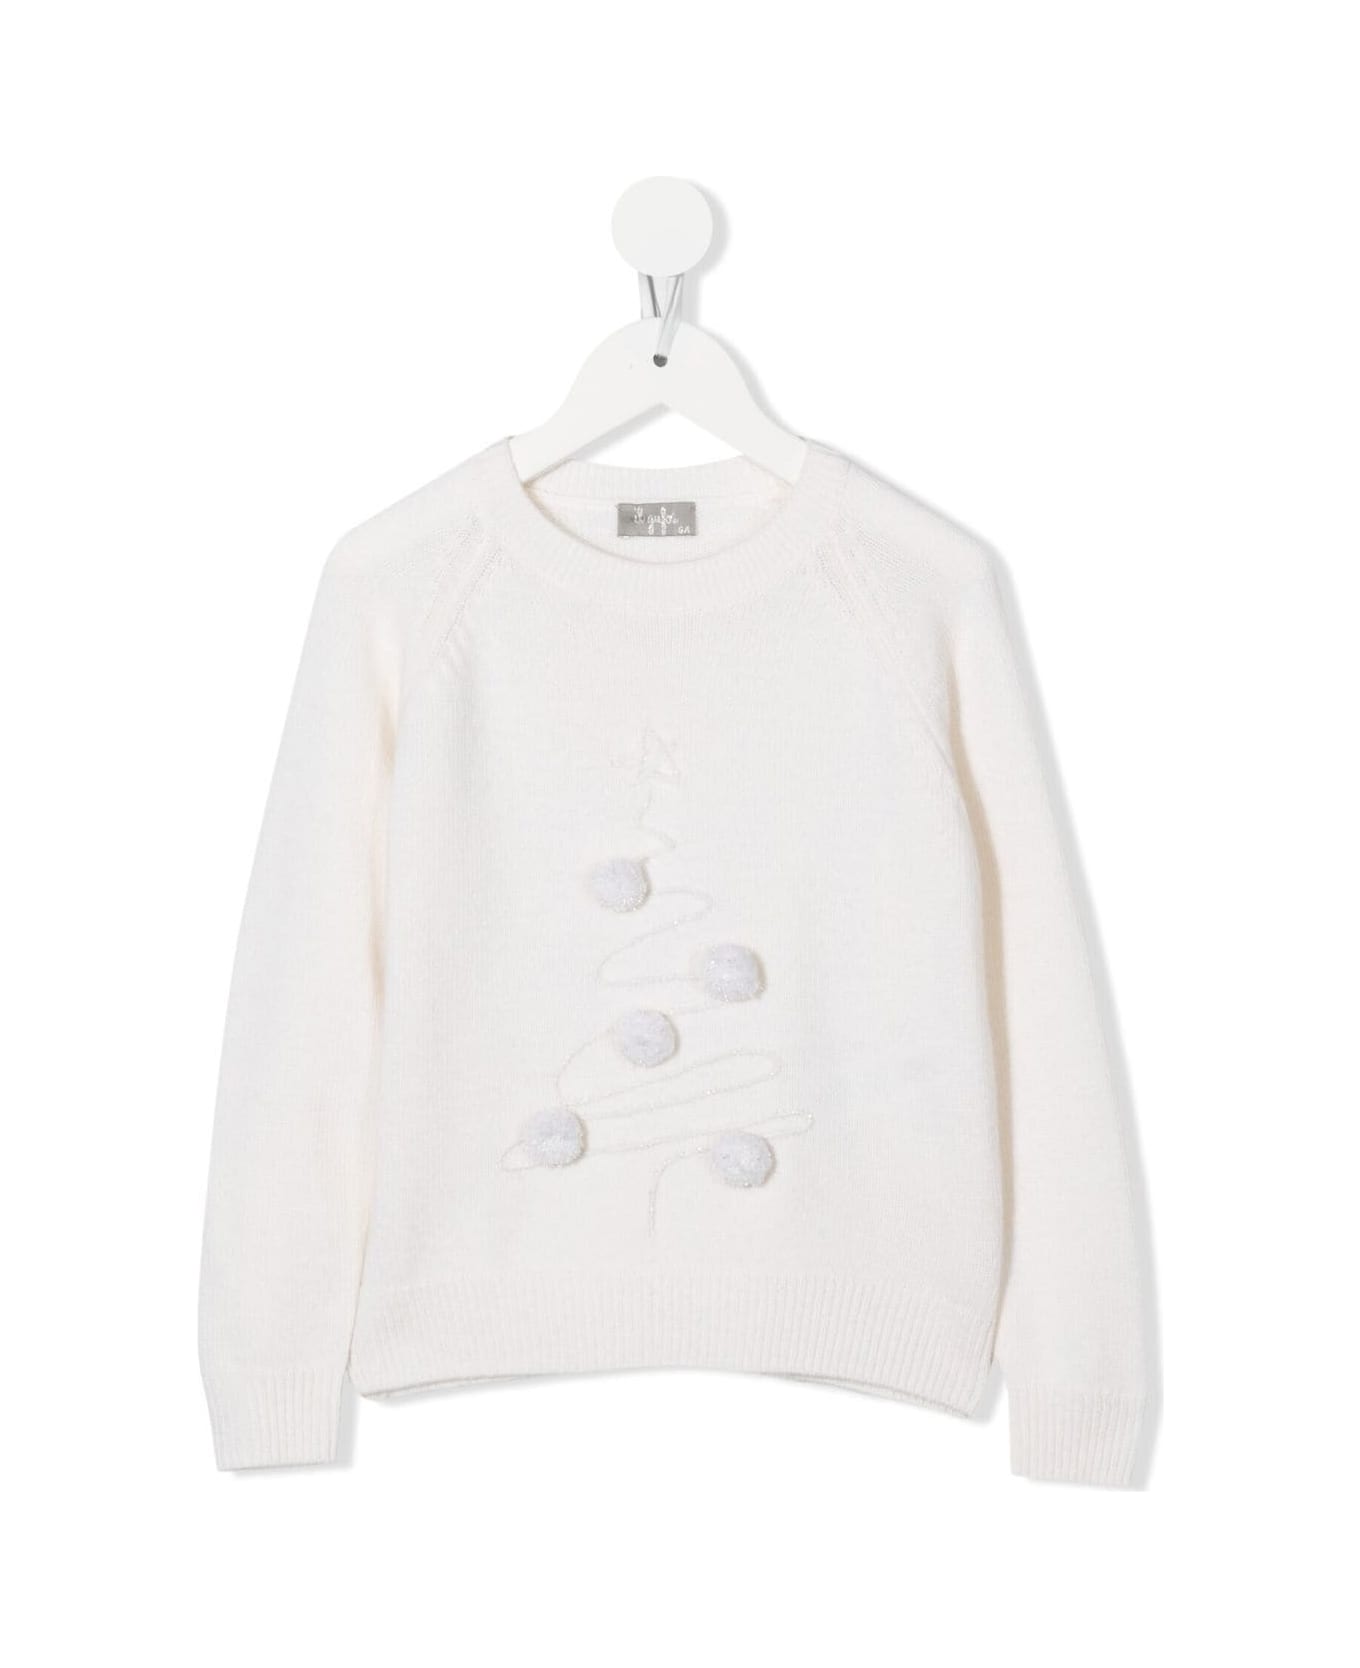 Il Gufo Kids White Sweater With Embroidered Christmas Tree - Nube/latte